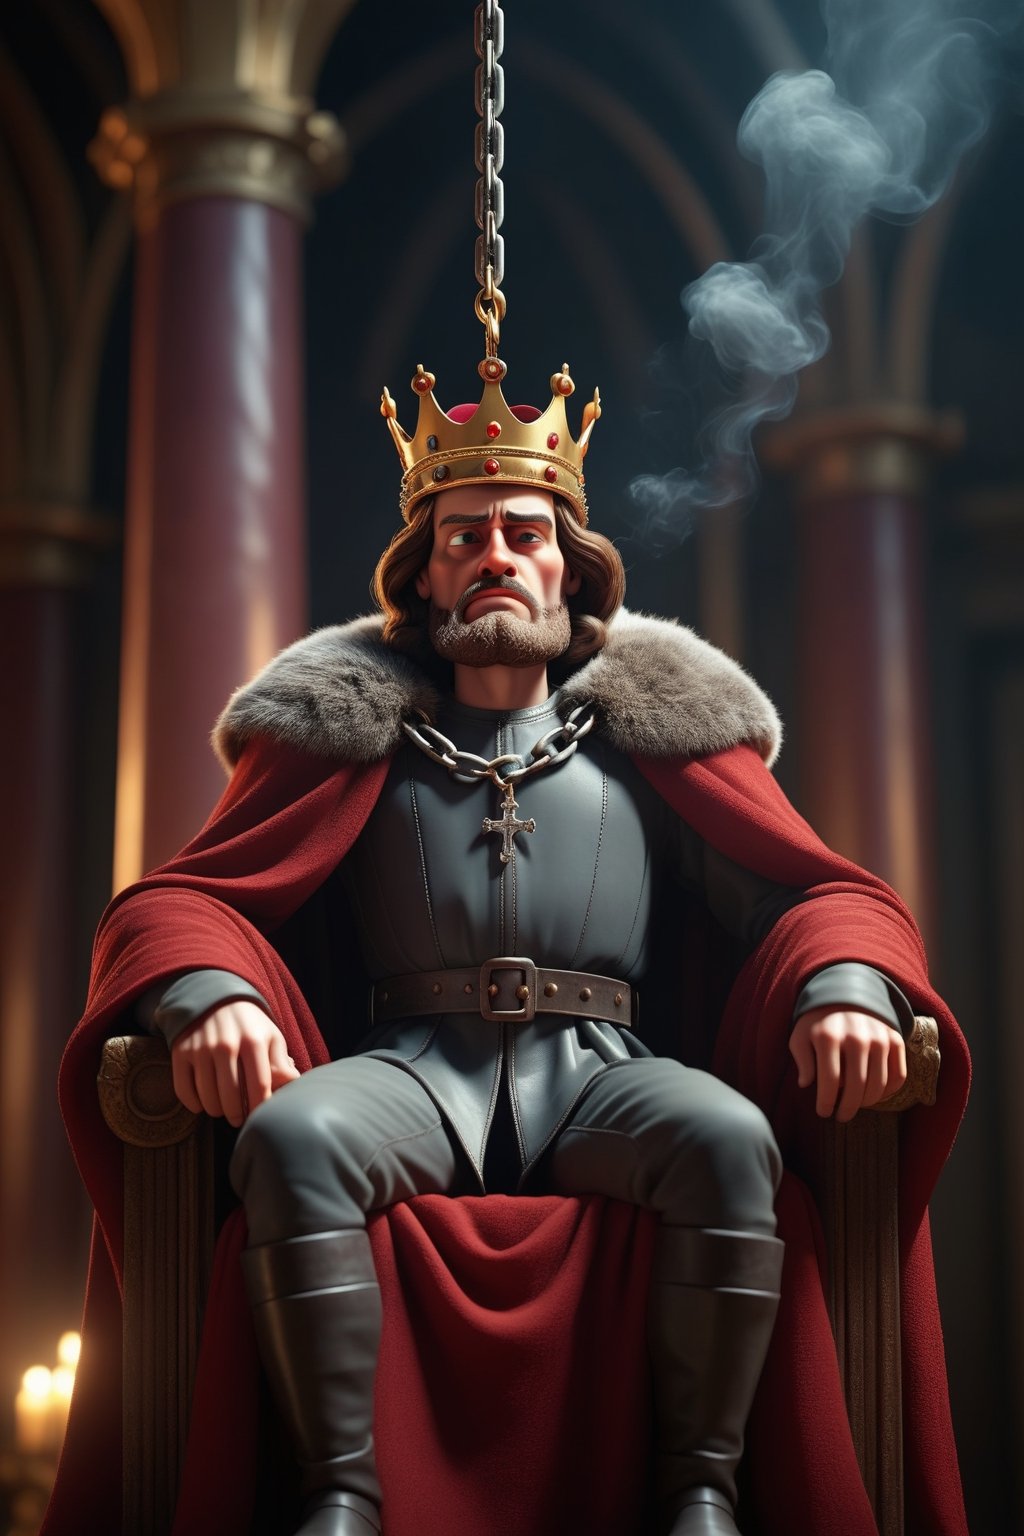 king chained to medium-sized throne sitting in a great hall BREAK Sword of Damocles hanging over the king's head BREAK death hanging by a thread, danger, brilliant colors, unfocused dark smoky background, sheen, chiaroscuro, smoke, blood,3D